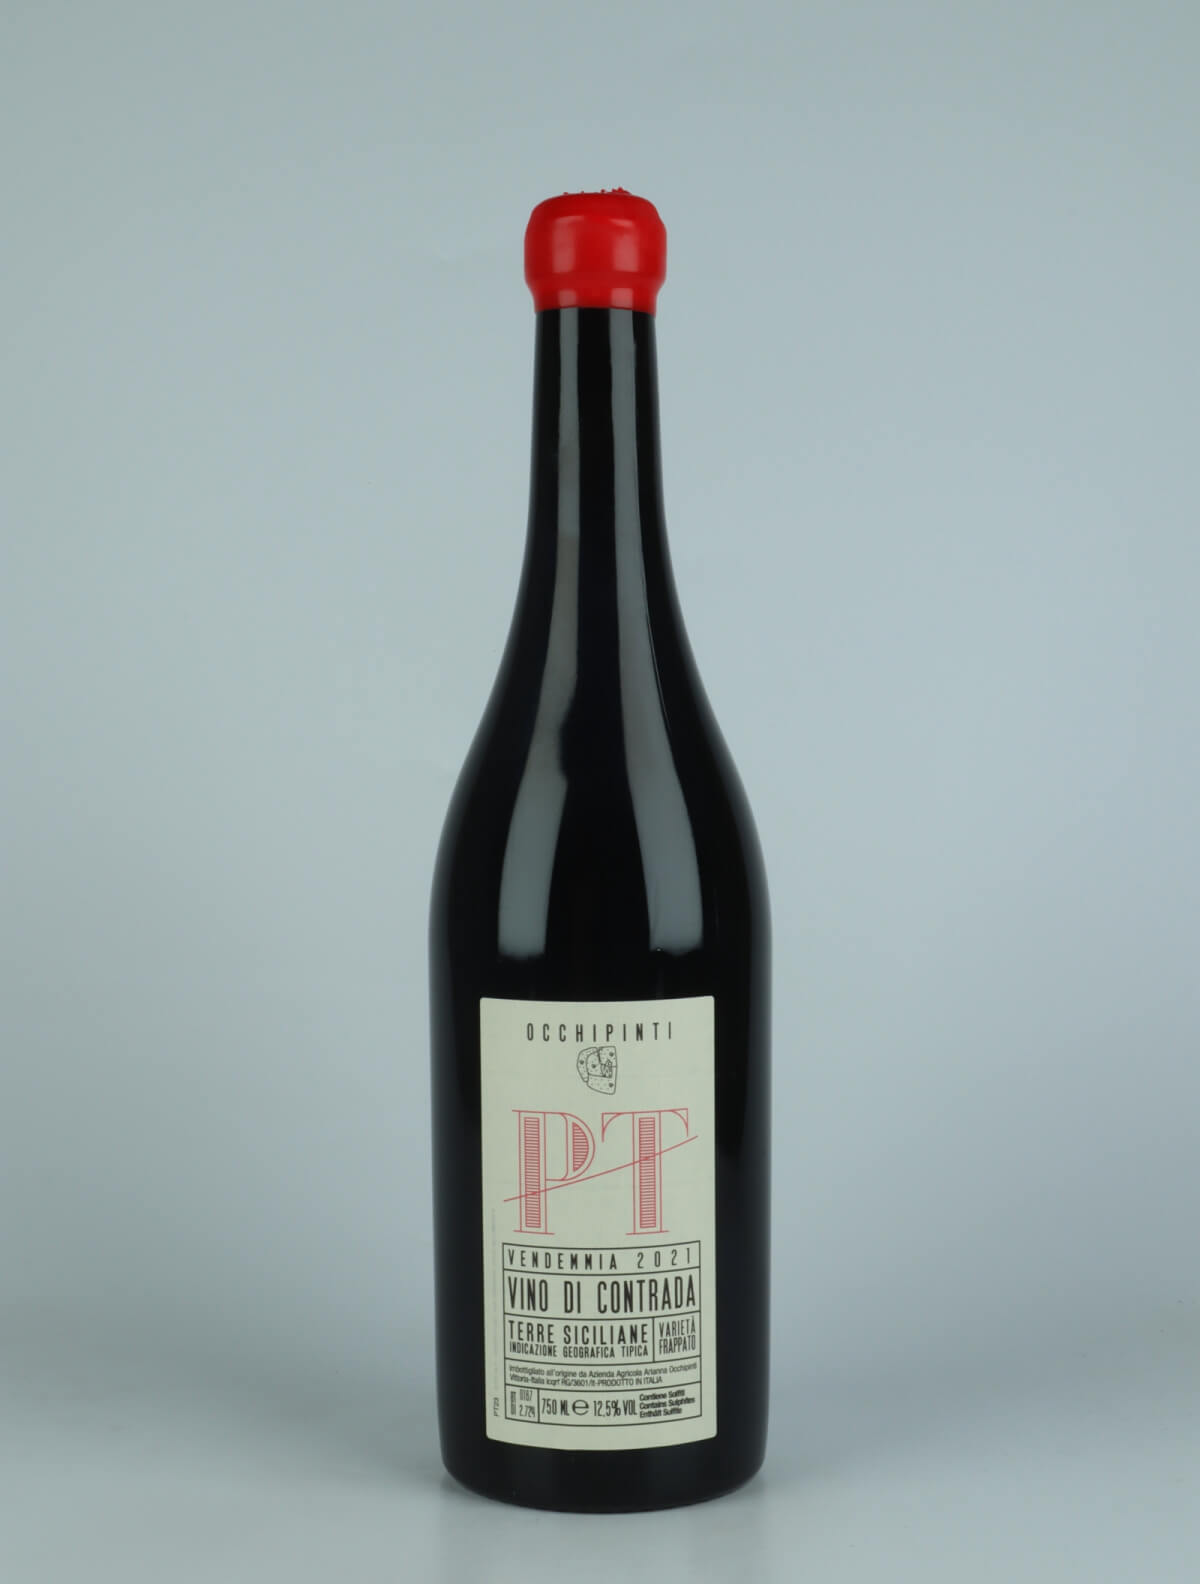 A bottle 2021 Pettineo - PT Red wine from Arianna Occhipinti, Sicily in Italy